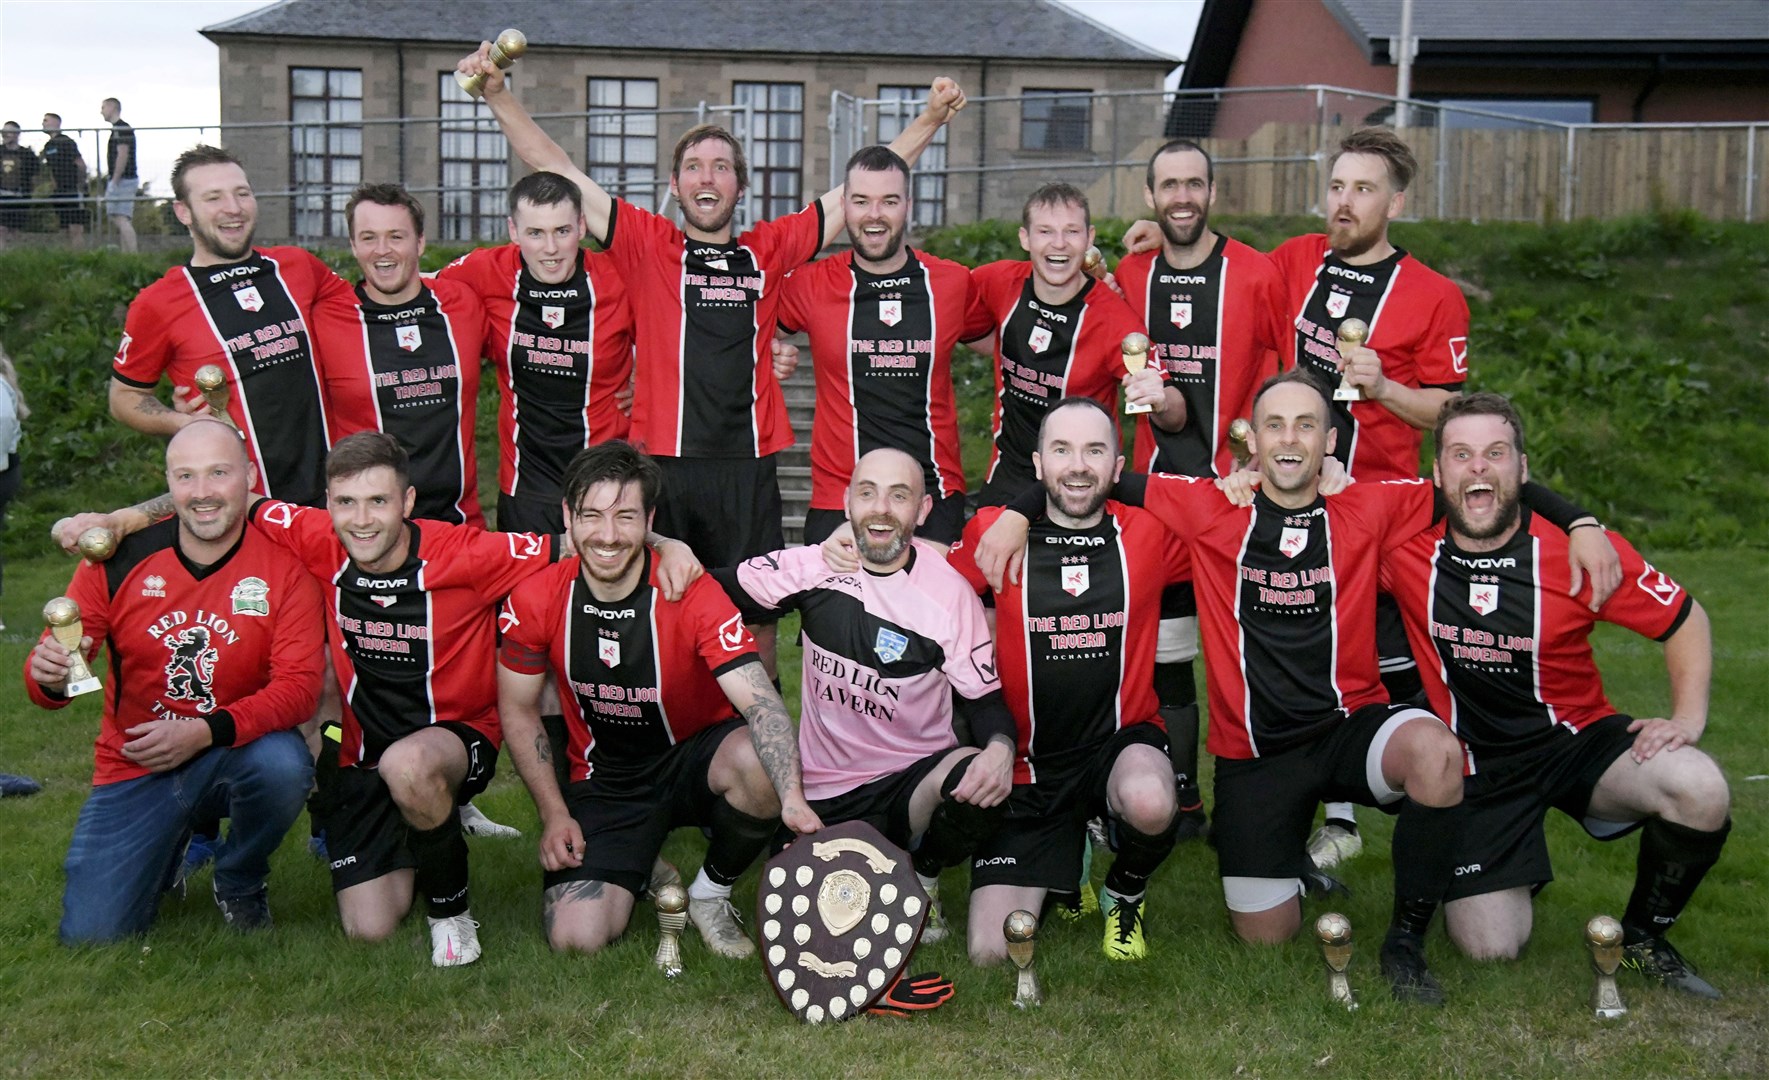 We are the champions! The Fochabers team in jubilant mood. Picture: Beth Taylor